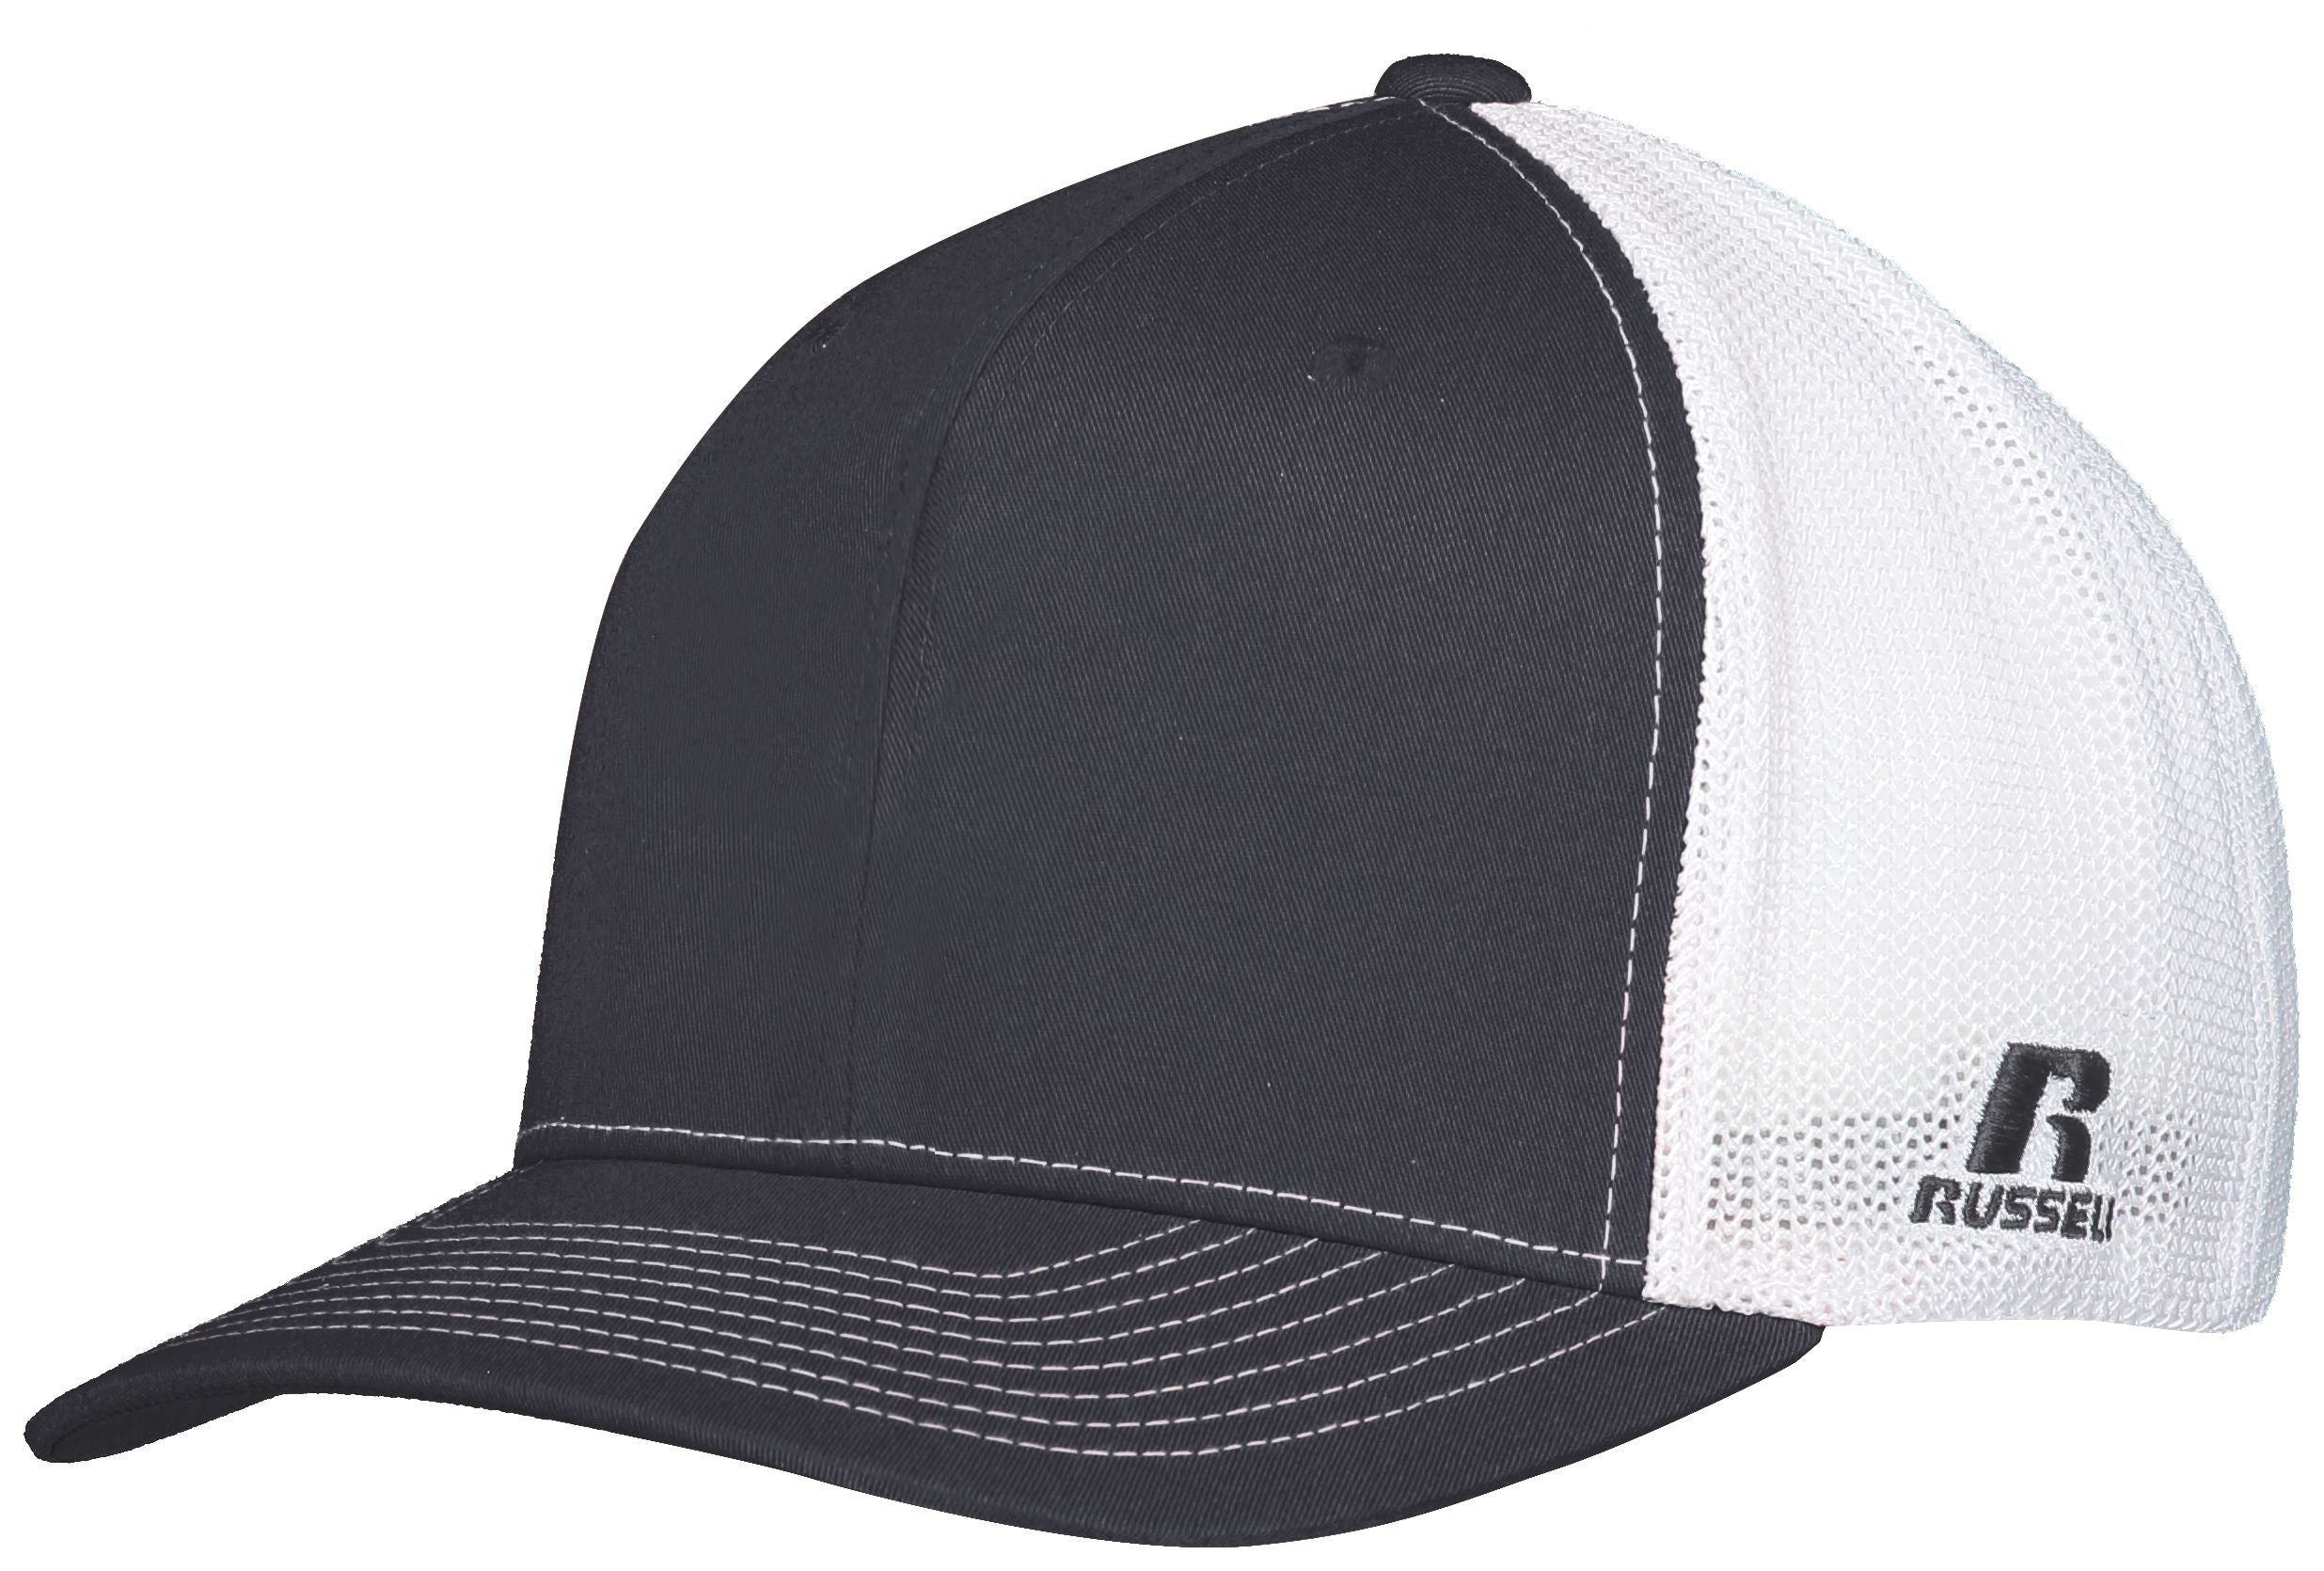 Russell Athletic Flexfit Twill Mesh Cap in Stealth/White  -Part of the Adult, Headwear, Headwear-Cap, Russell-Athletic-Products product lines at KanaleyCreations.com